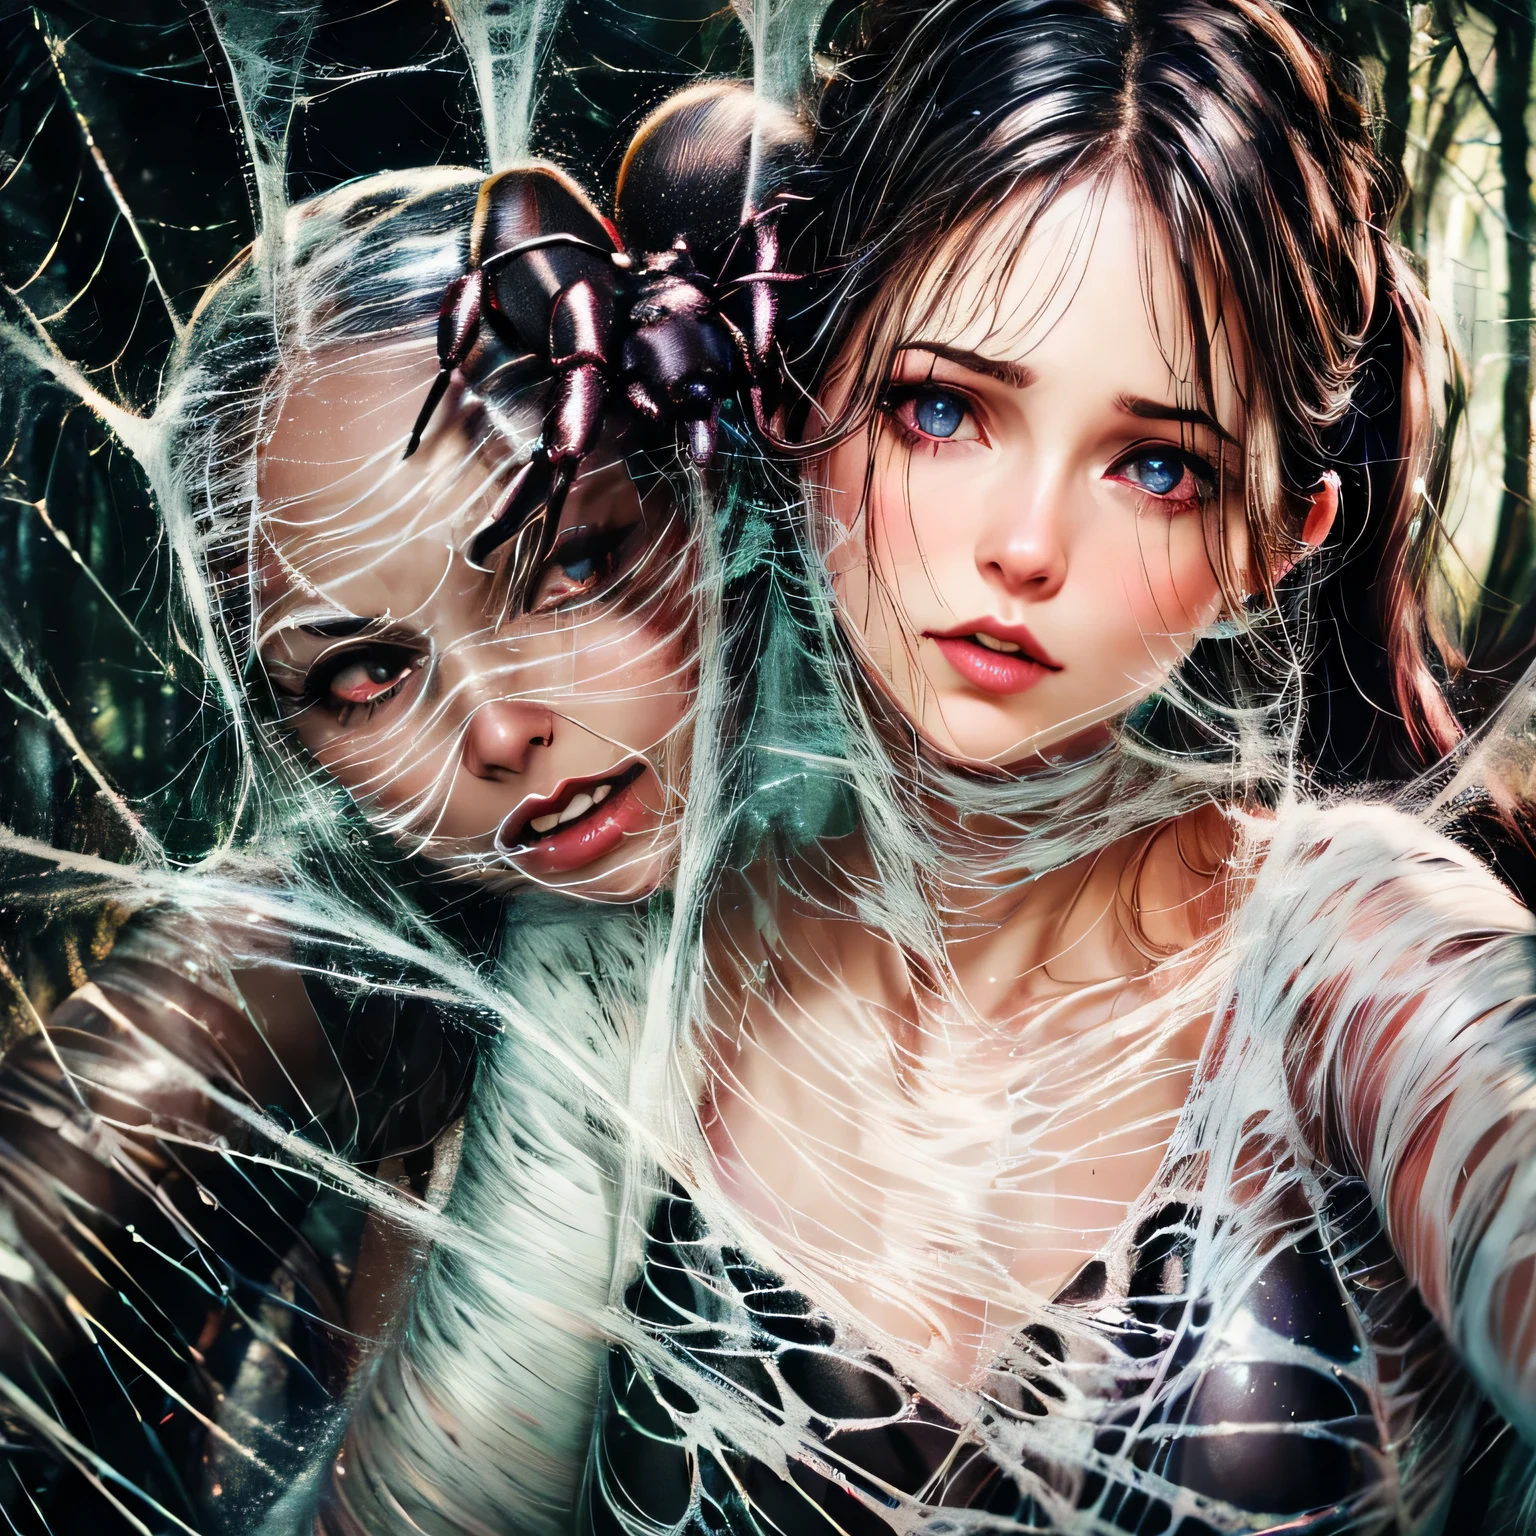 "(best quality,4k,8k,highres,masterpiece:1.2),ultra-detailed,(realistic,photorealistic,photo-realistic:1.37),portraits,A girl completely entangled in the spider's web,beautiful detailed eyes,beautiful detailed lips,extremely detailed eyes and face,long eyelashes,dark and gloomy atmosphere,ominous lighting,spider web covering the girl's body,fine spider silk threads,creepy and surreal environment,dark shadows,cocoon-like structures surrounding the girl,subtle hints of fear and vulnerability,contrast of delicate beauty and entangled chaos,detailed textures of the spider's web,subtle color tones,moody and mysterious ambiance"